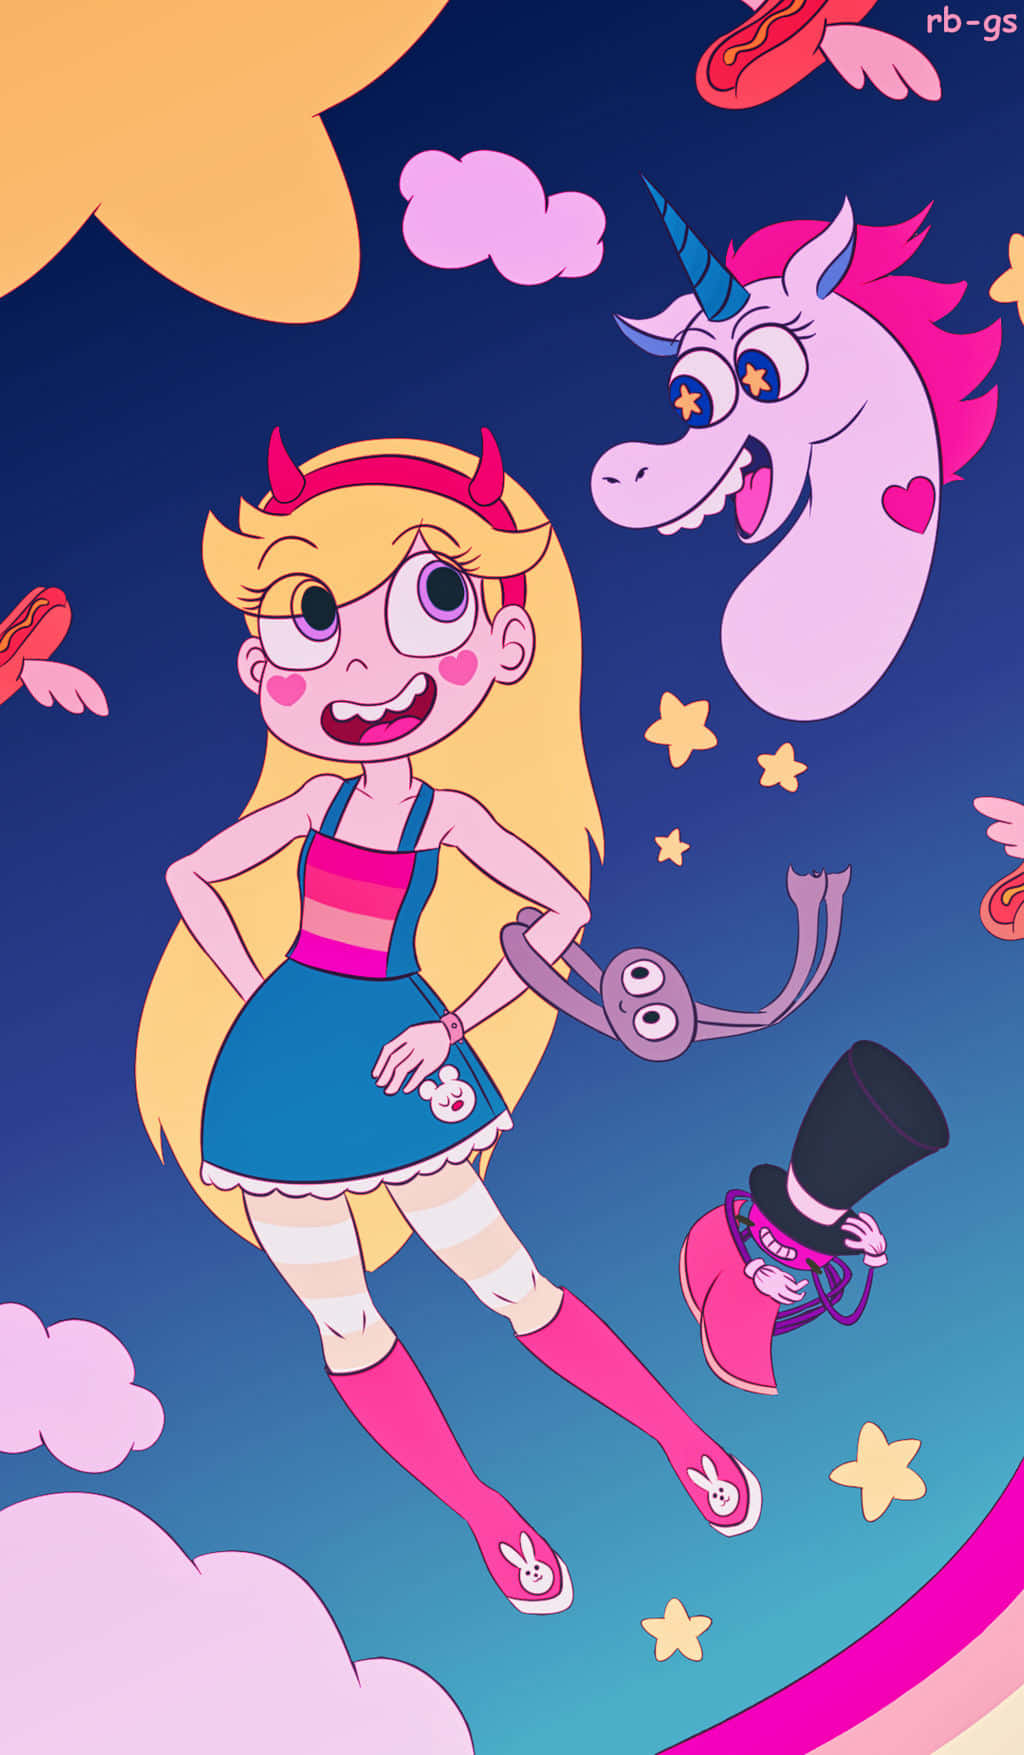 Magical Adventure of Star&Marco with The Forces of Evil